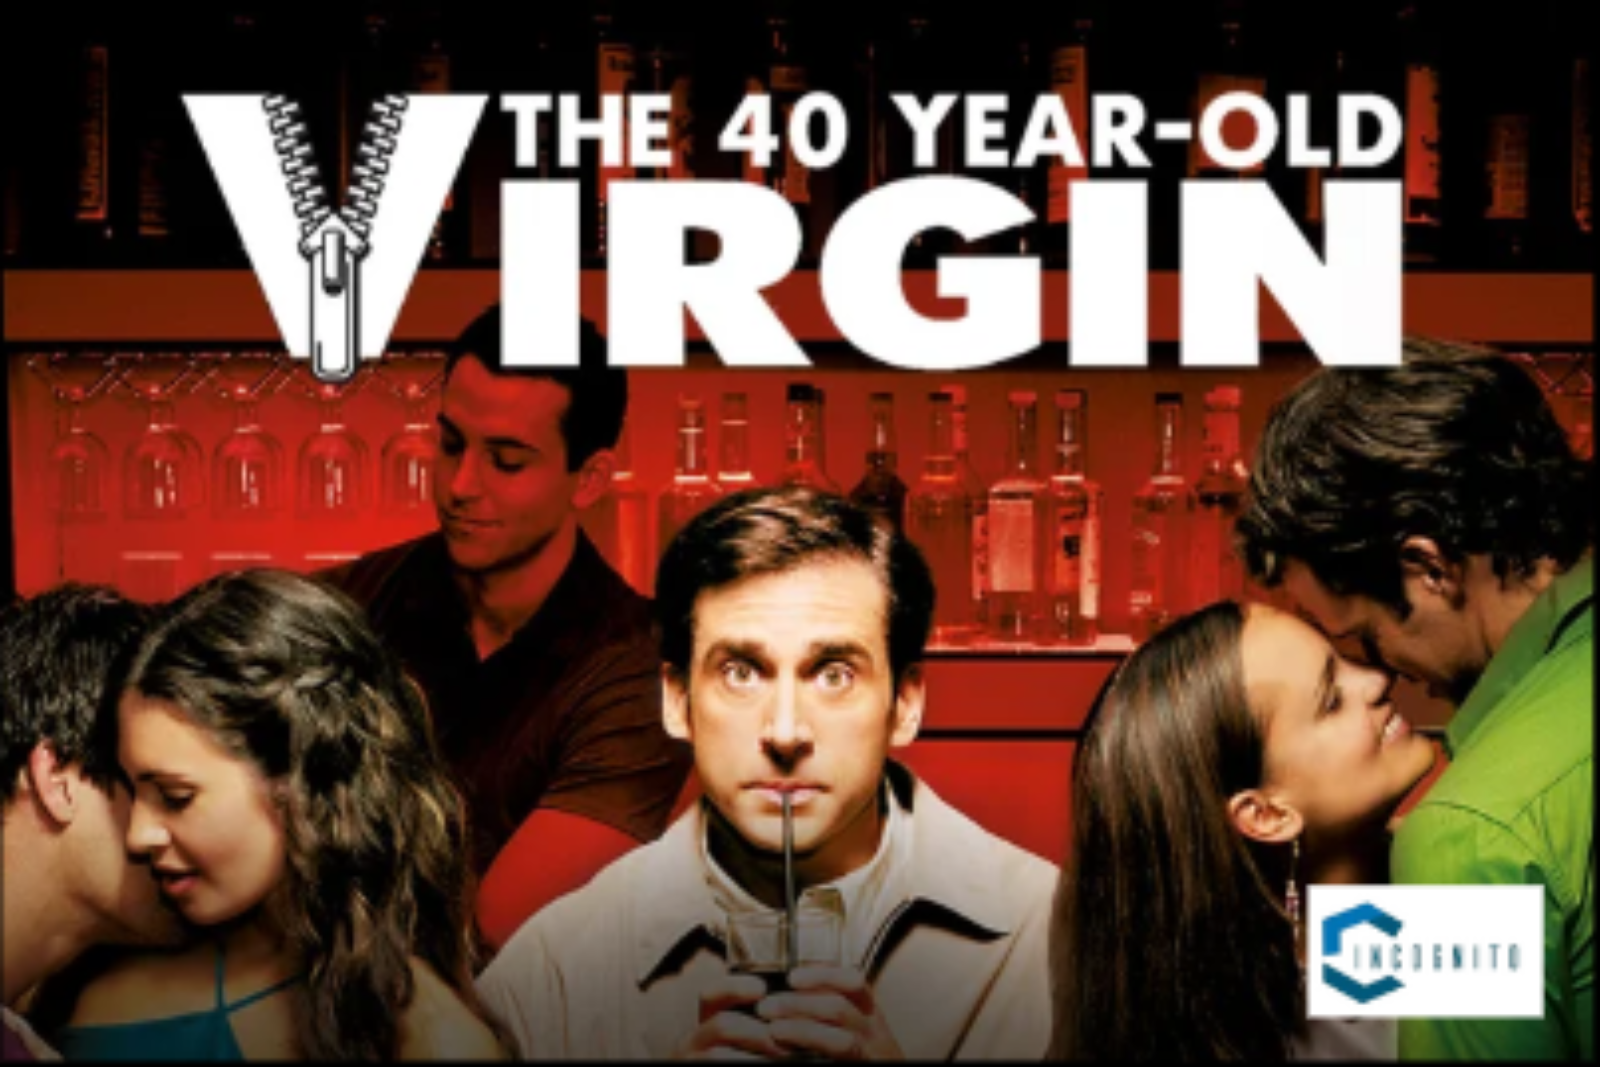 The 40 Year Old Virgin Cast: What Were Their Roles? What Are They Doing Now?